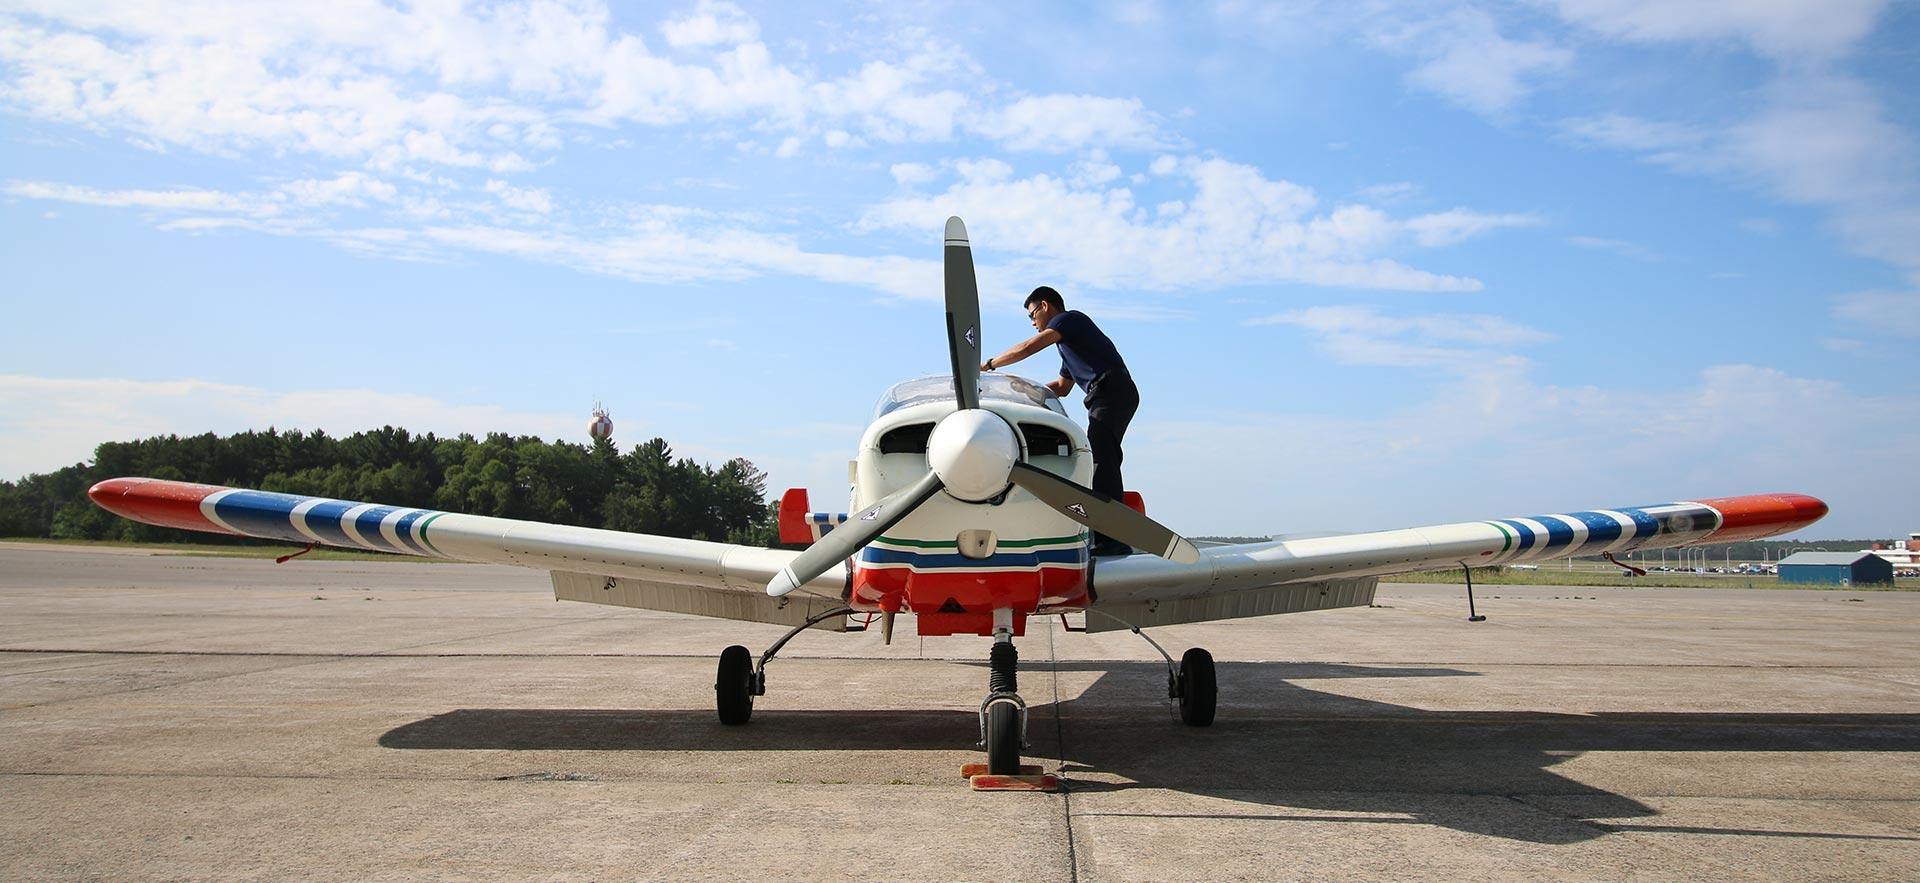 Student preparing Sault College aircraft on runway for flight 